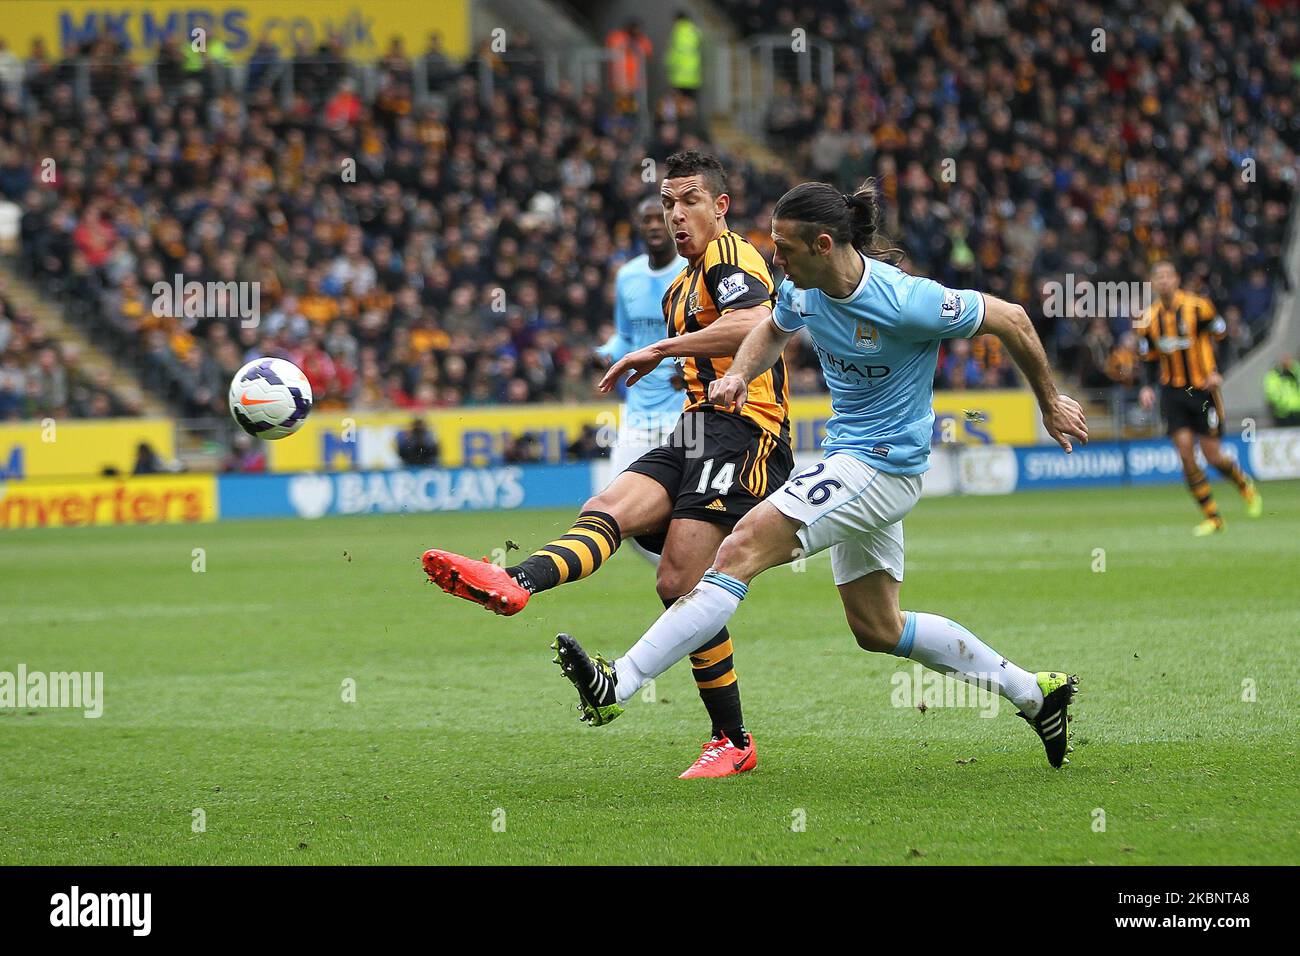 Martin Demichelis of Manchester City crosses the ball past Hull City's Jake Livermore during the Premier League match between Hull City and Manchester City at the KC Stadium, Kingston upon Hull on Saturday 15th March 2014 (Photo by Mark Fletcher/MI News/NurPhoto) Stock Photo